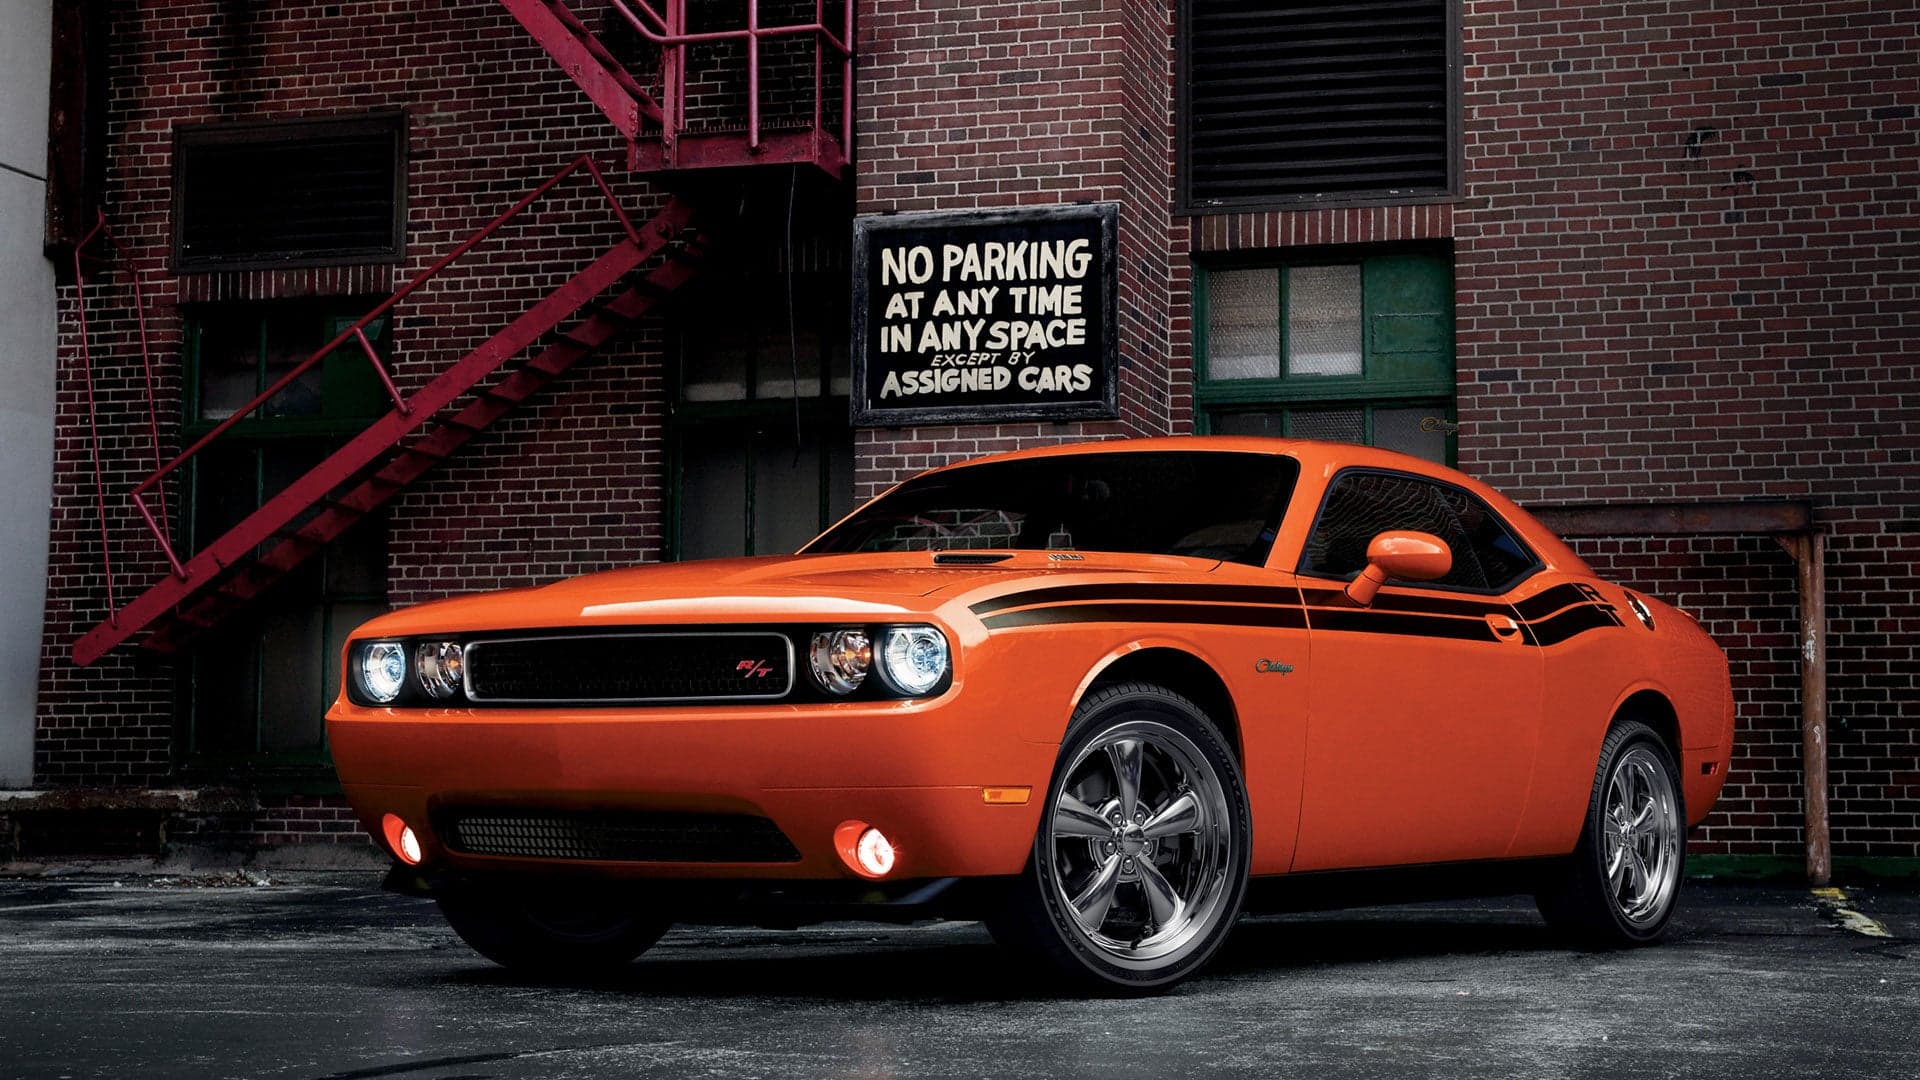 A Pensacola Man Attempted Time Travel in a Dodge Challenger